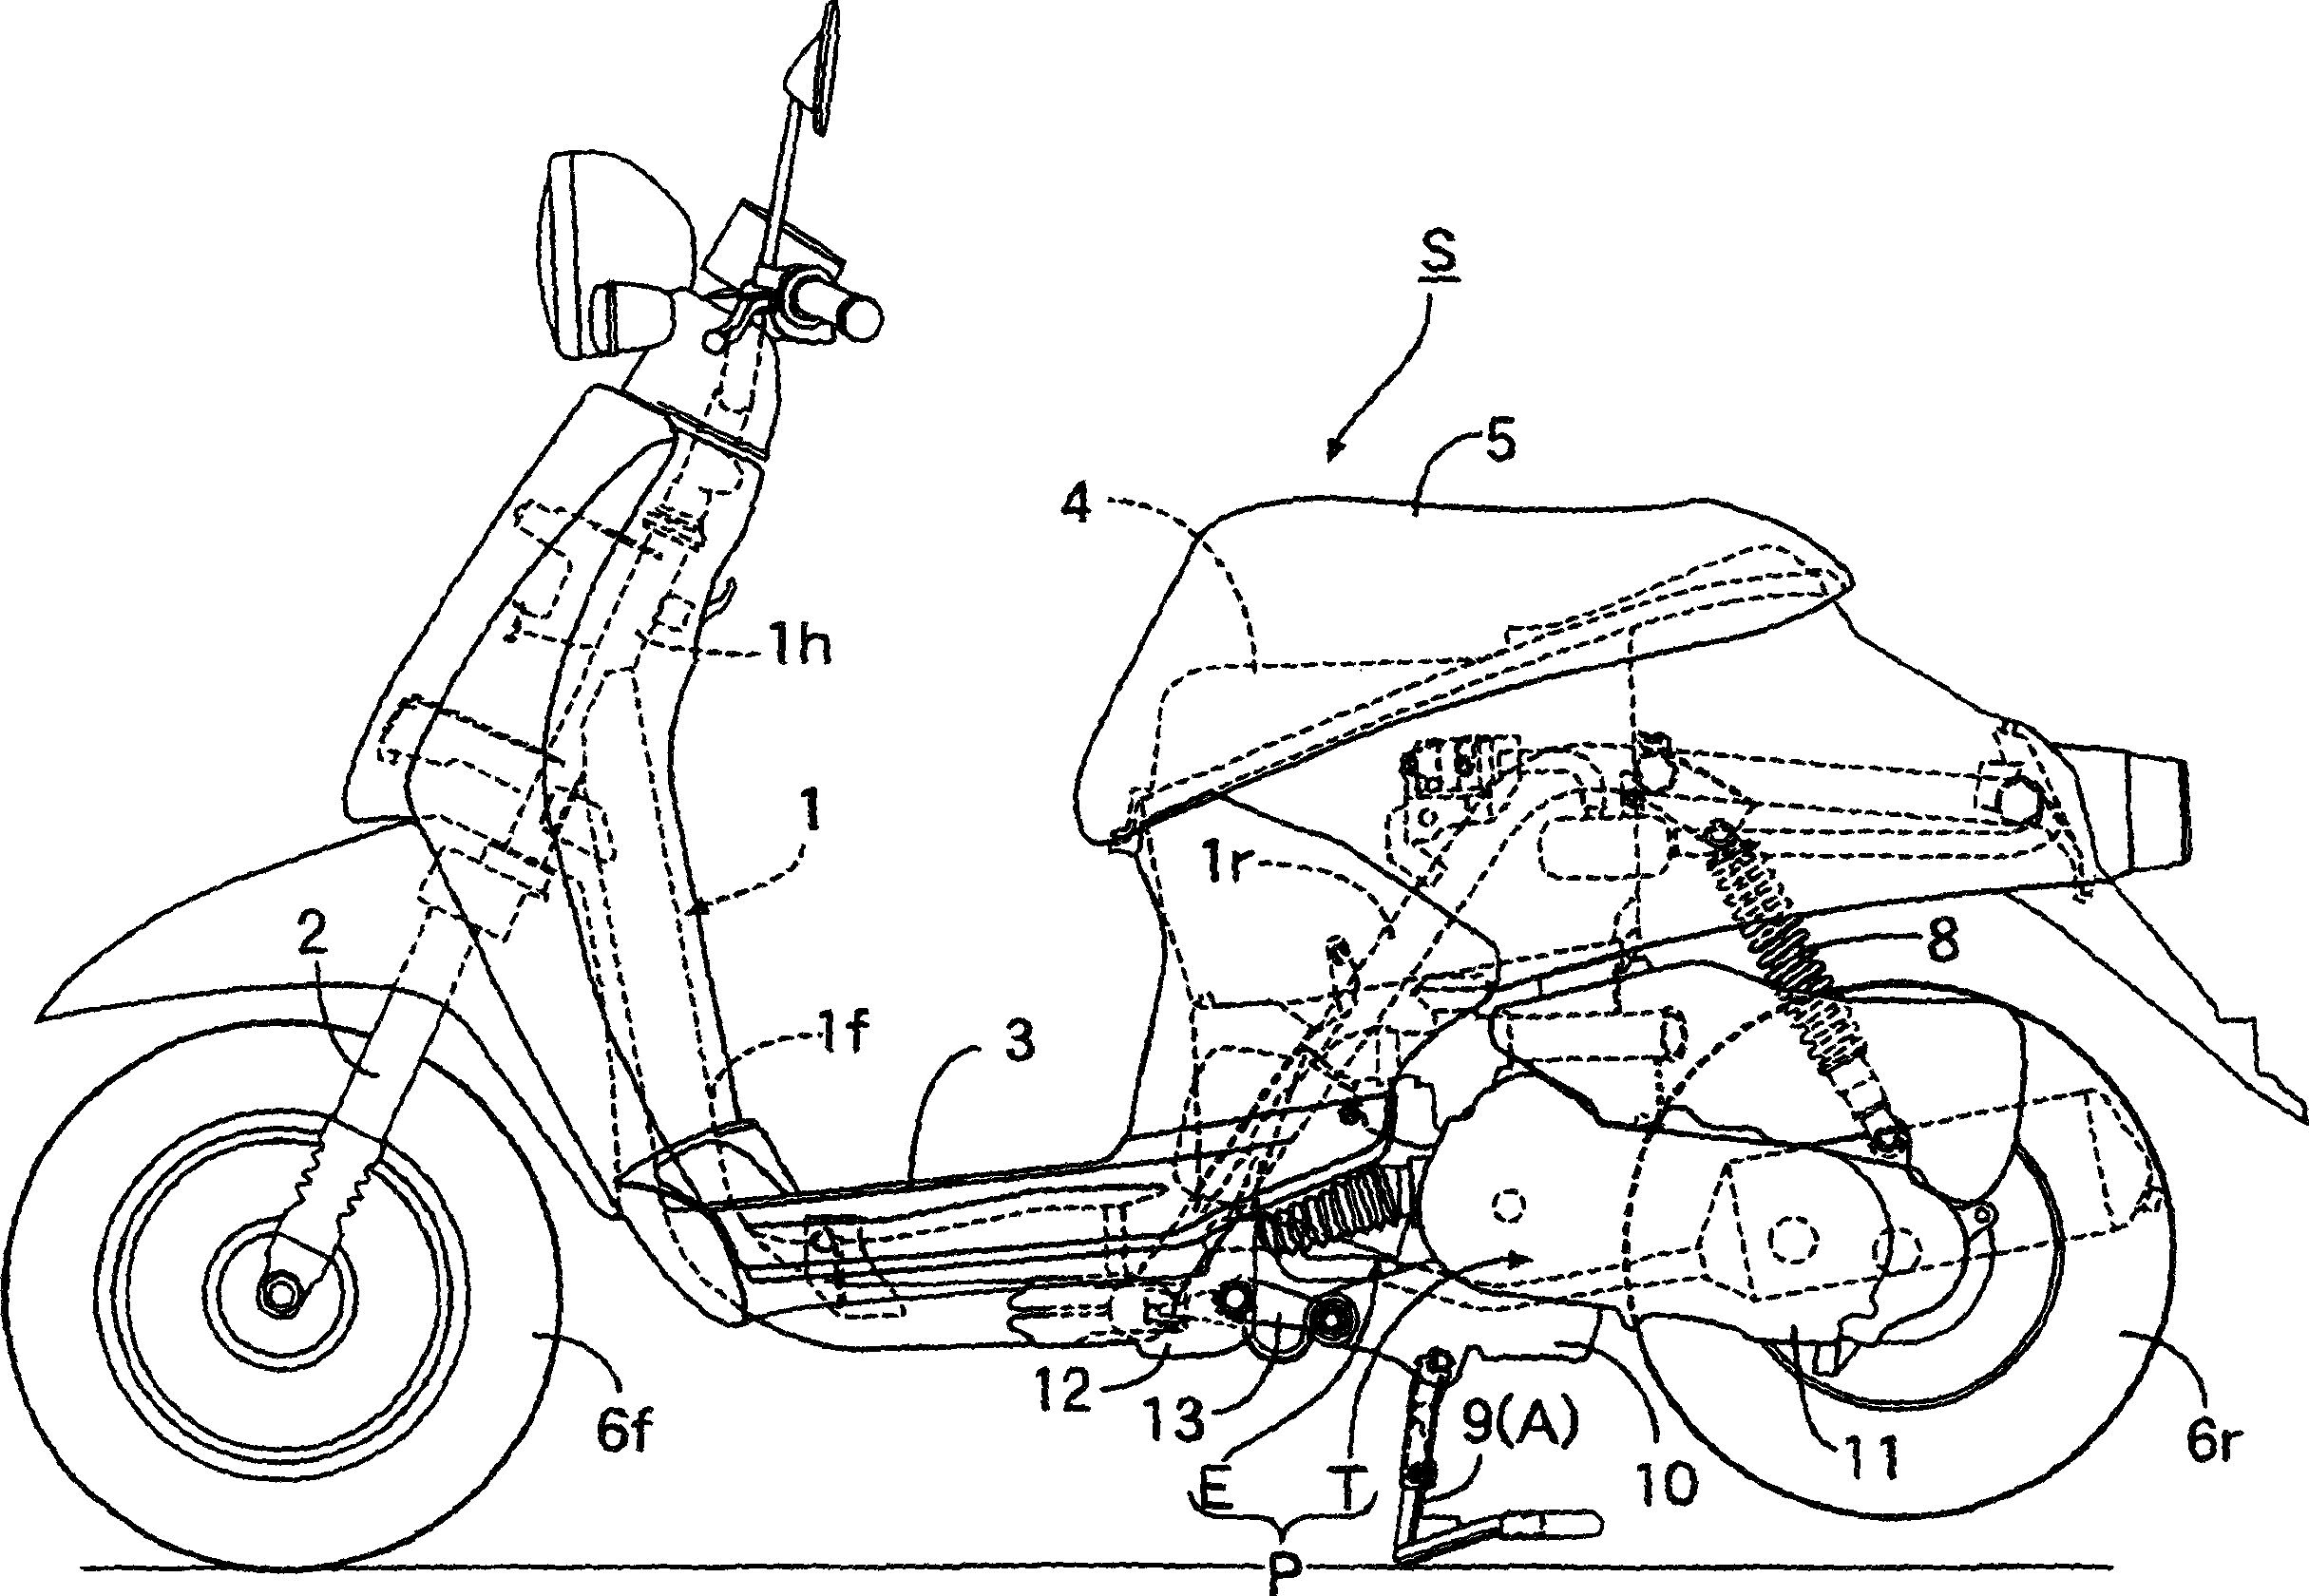 Support gear of motor two-wheel cycle